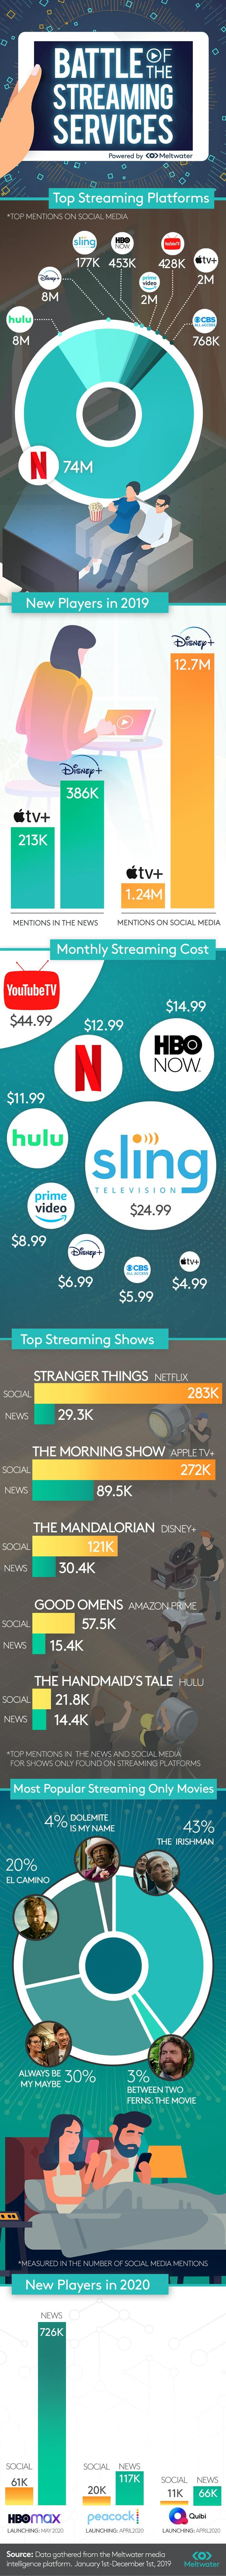 Infographic titled "Battle of the Streaming Services". Content includes Top Streaming Platforms, New Players in 2019, Monthly Streaming Cost, Top Streaming Shows, Most Popular Streaming-Only Movies, and New Players in 2020